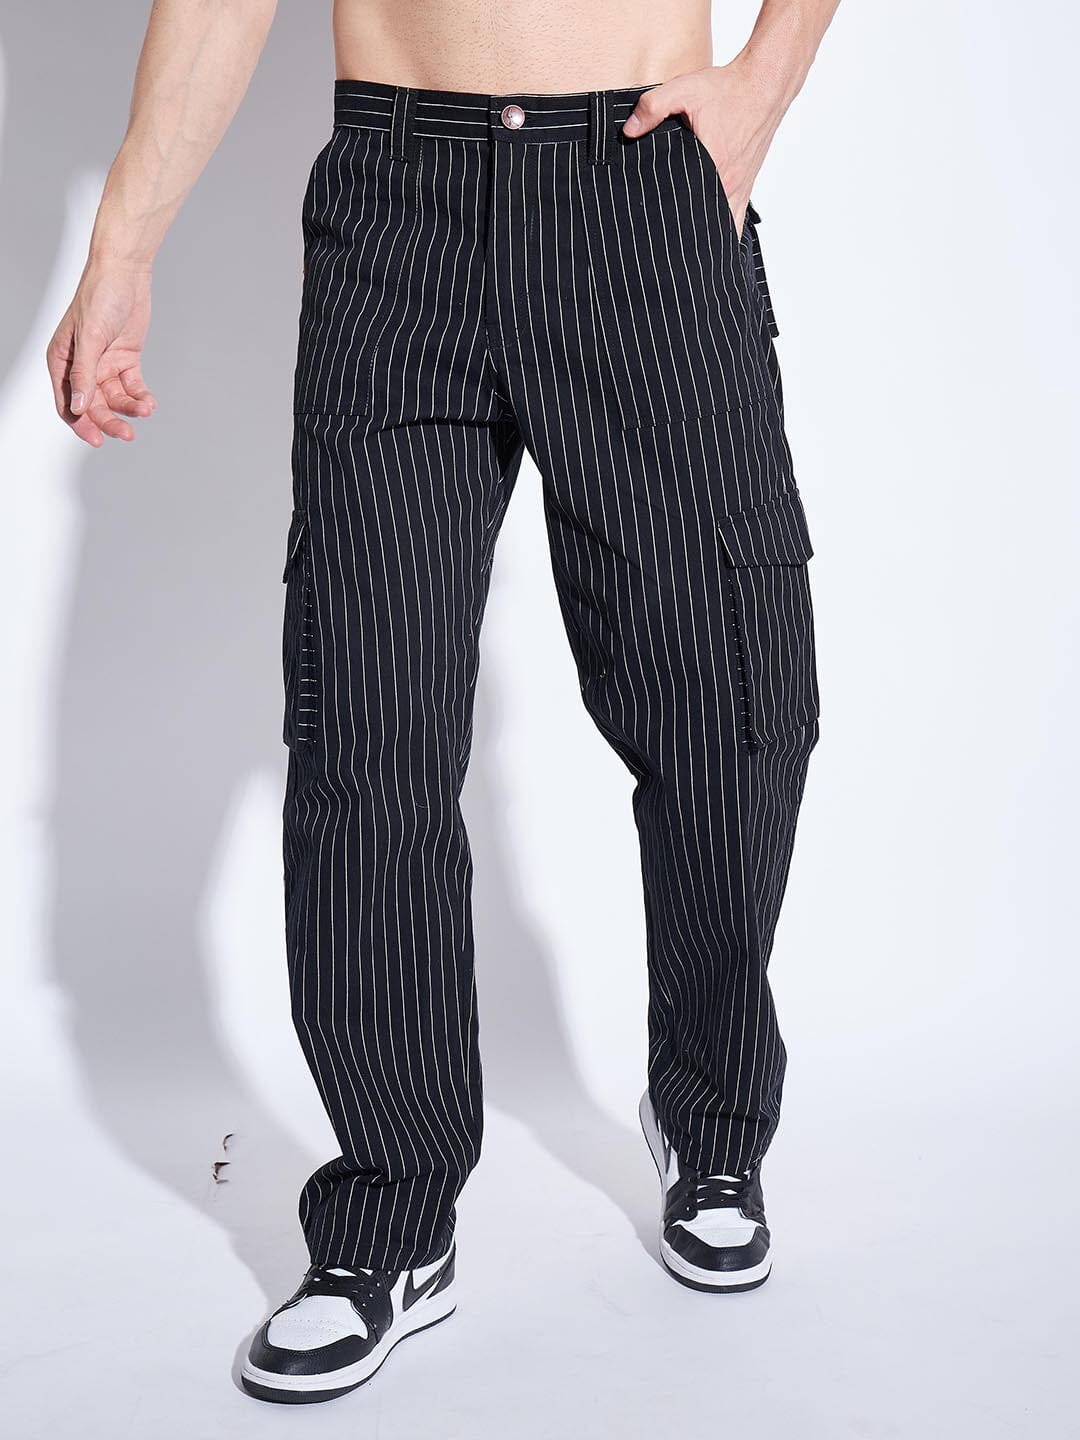 Dior double pleat Striped pants men - Glamood Outlet